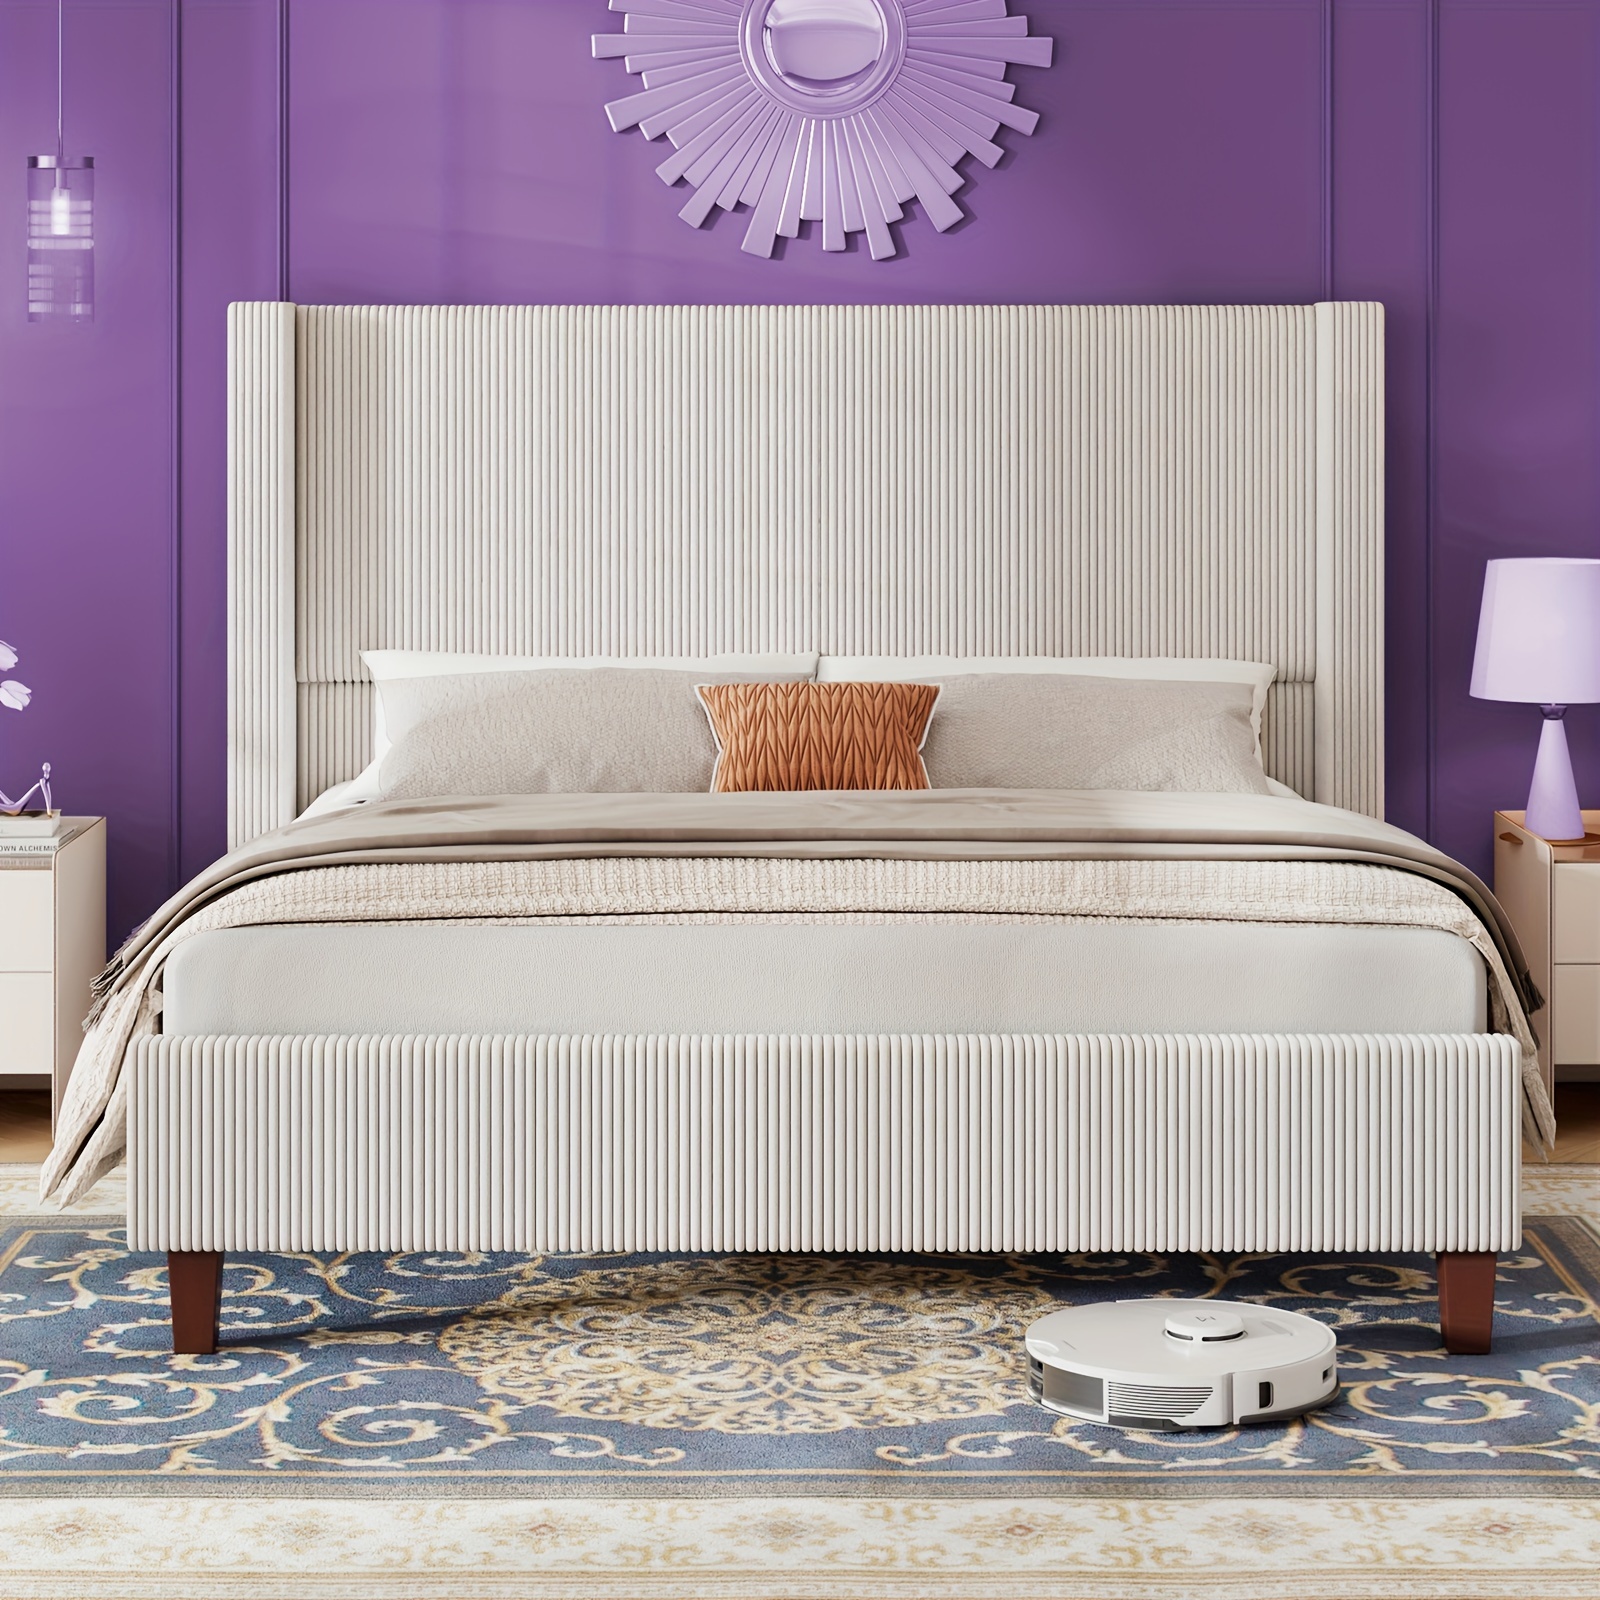 

50.8" Upholstered Platform Bed Frame, Corduroy Bed Frame With Wingback Headboard With Solid Wood Legs, No Box Spring Needed